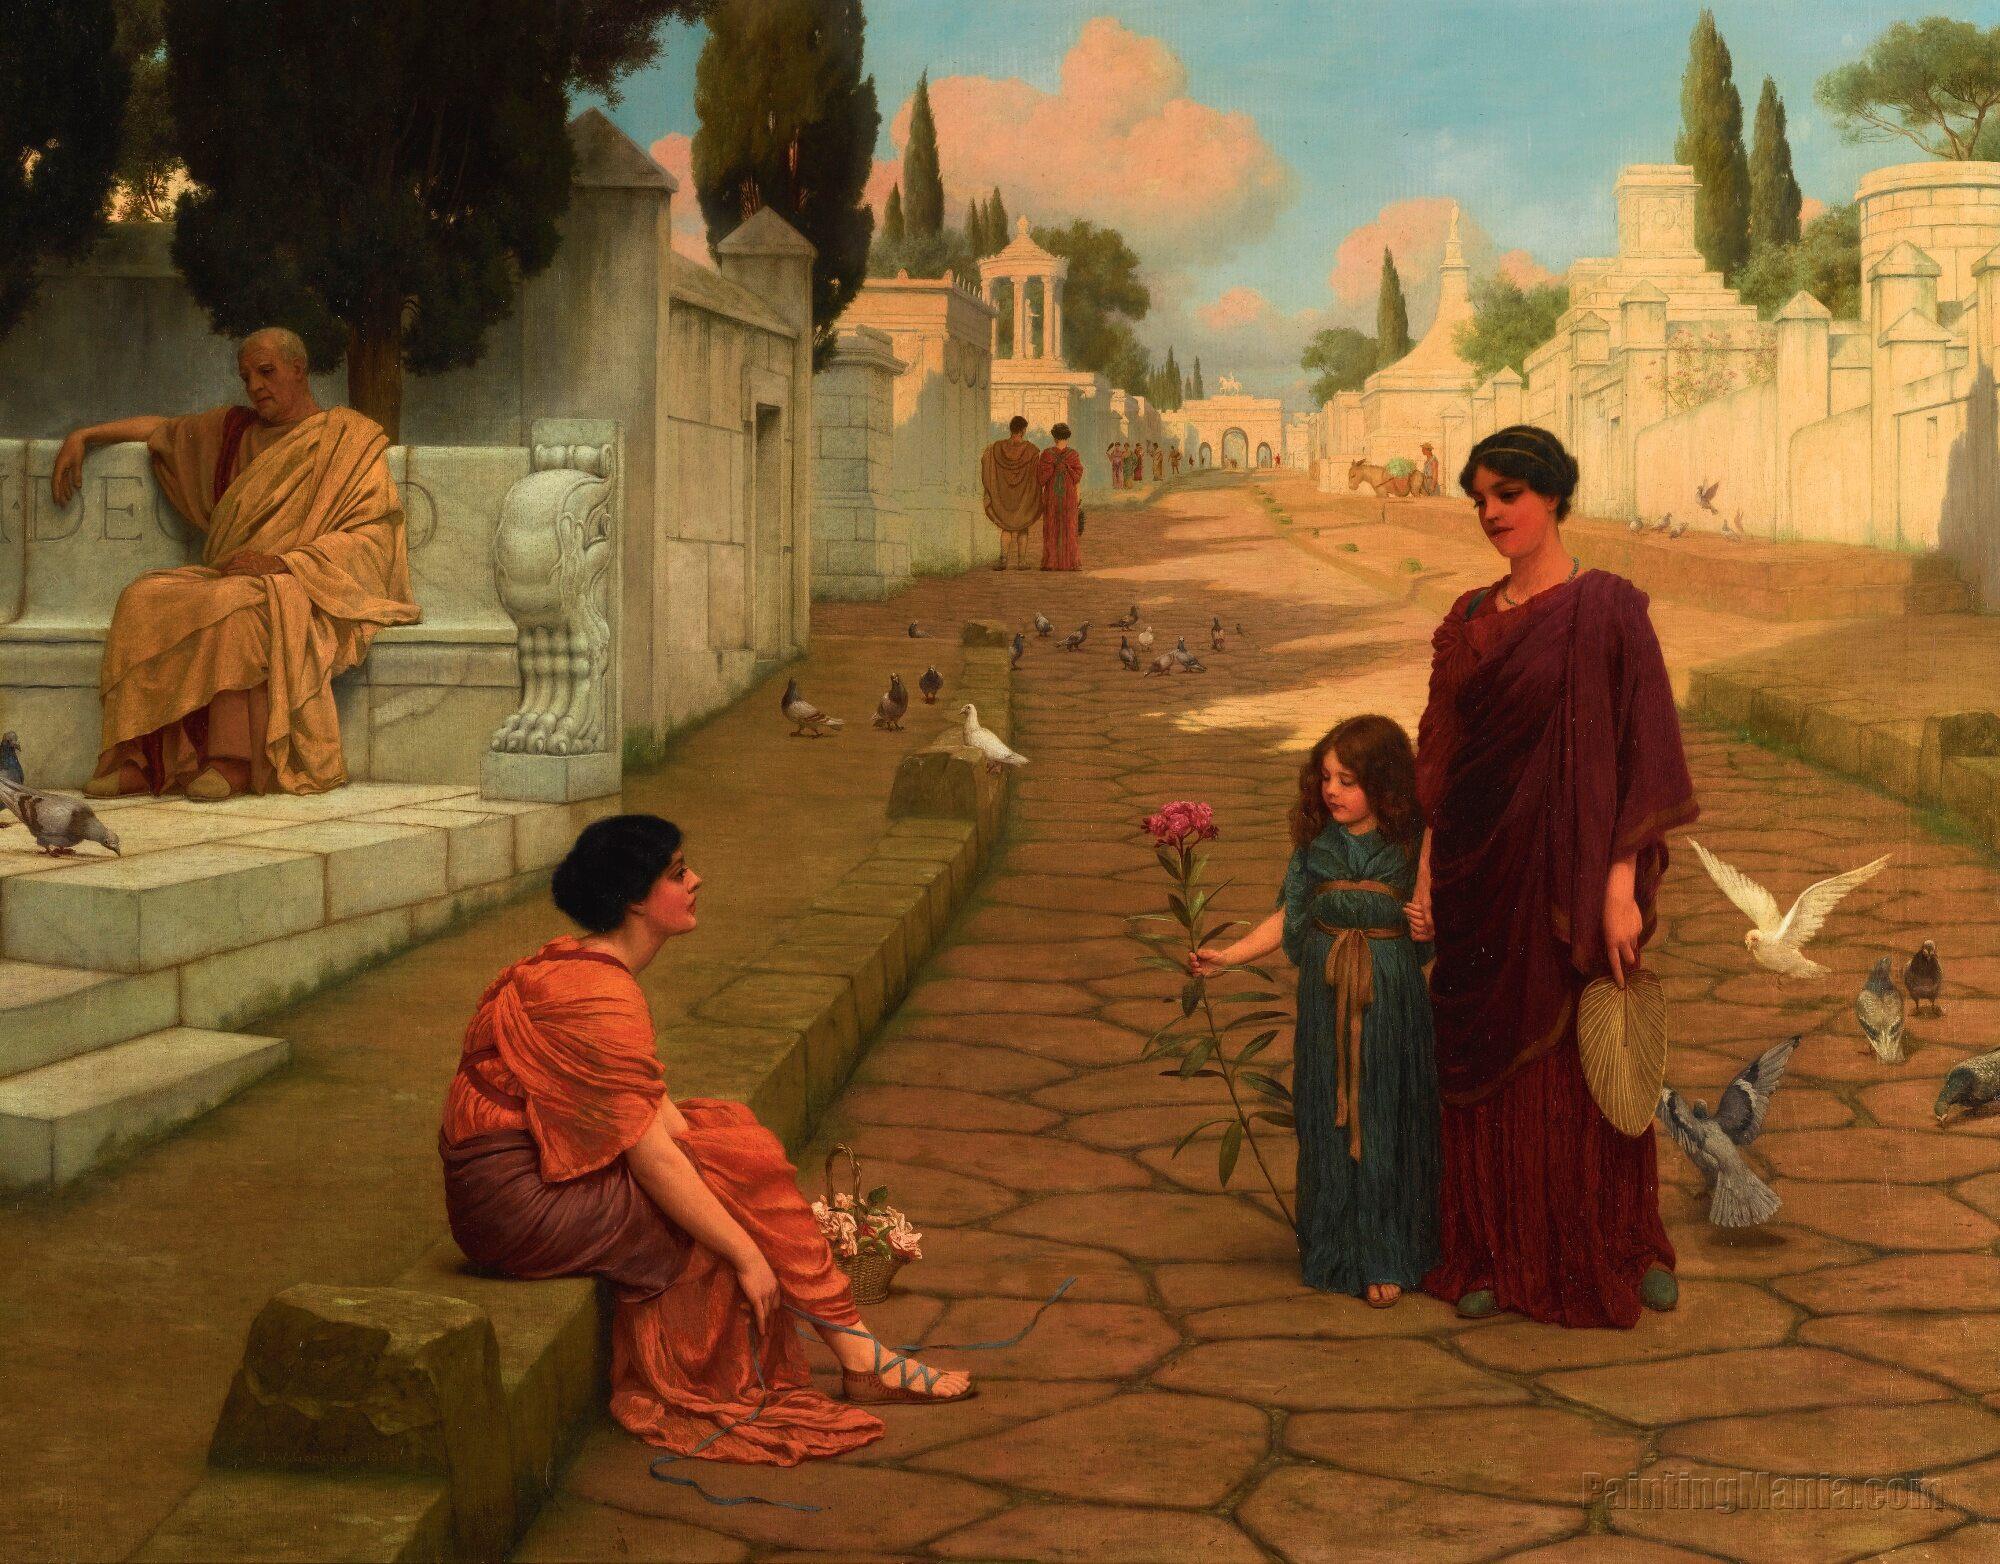 Outside the Gate of Pompeii